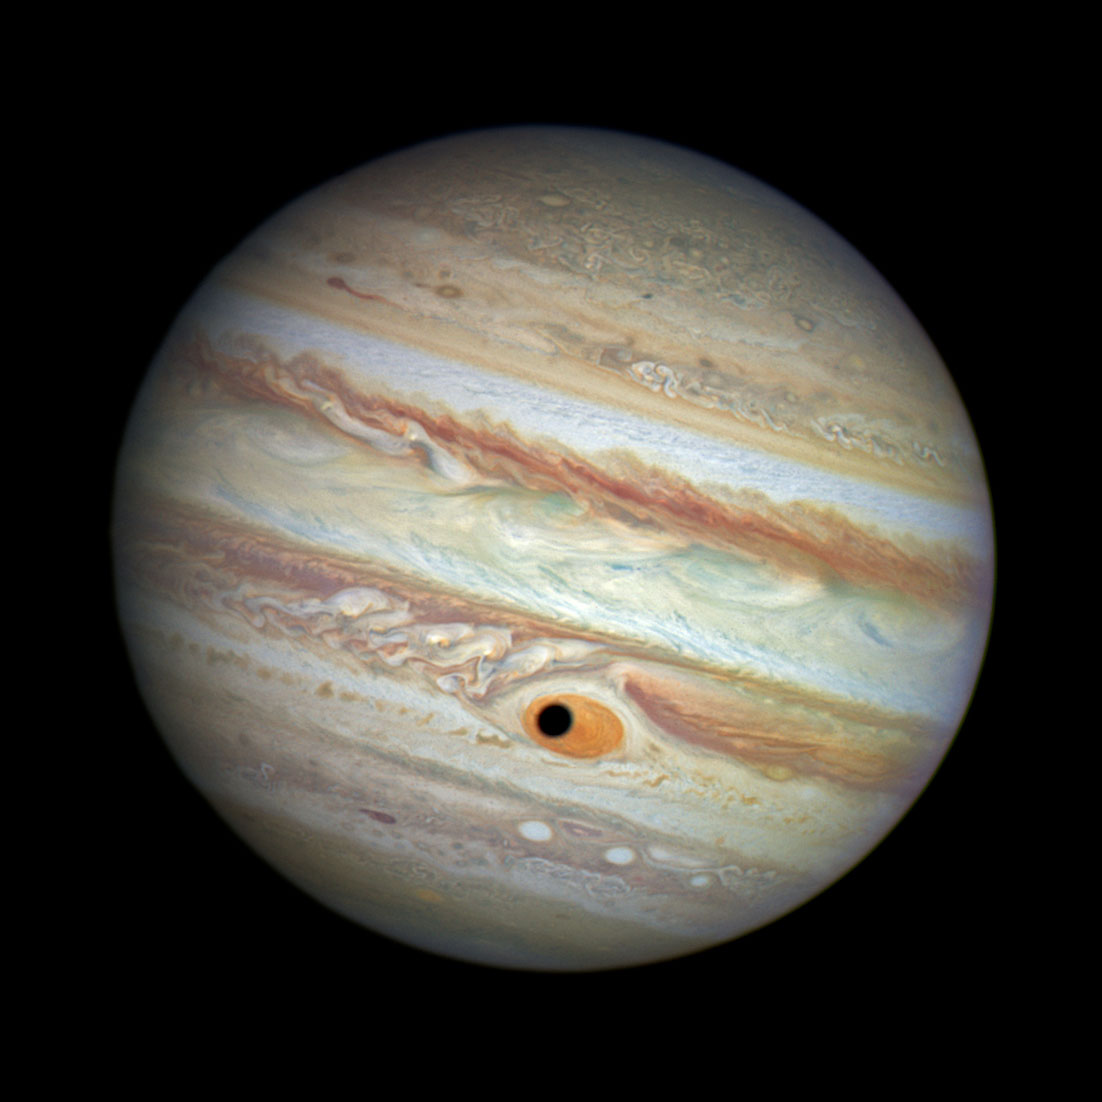 Jupiter's Giant Eye On April 21, 2014, when Hubble was being used to monitor changes in Jupiter's immense Great Red Spot (GRS) storm, the shadow of the Jovian moon Ganymede swept across the center of the GRS giving the giant planet the appearance of having a pupil in the center of a 10,000-mile-diameter  eye.